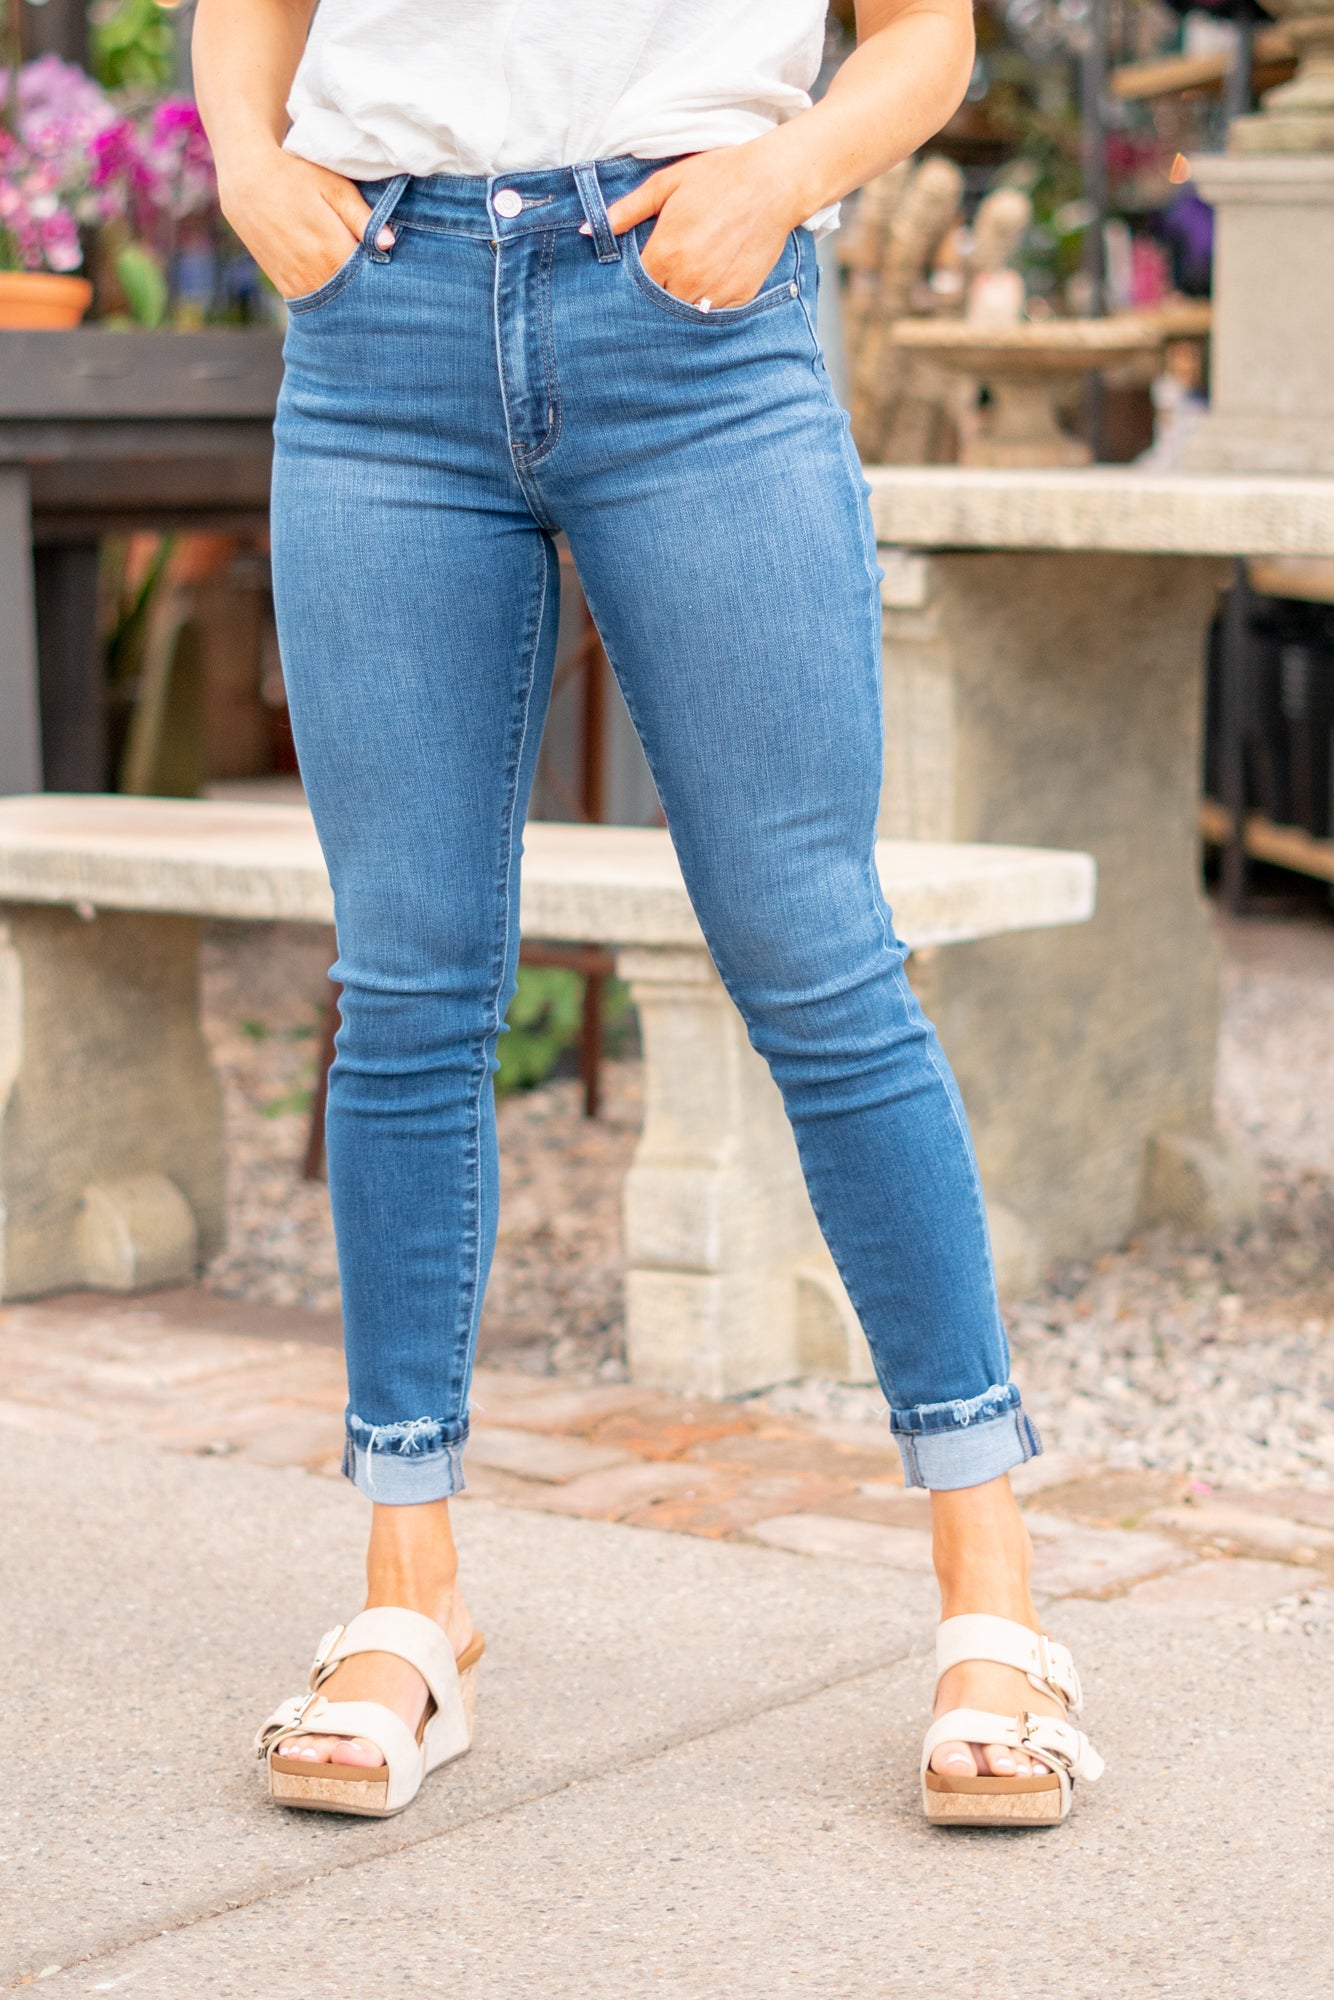 KanCan Jeans  These are the ones, the classic KanCan that can be dressed up or worn casually. Pair with heels and a front tuck for a night out.  Color: Medium Wash Cut: Fit Skinny, 27" Inseam  Rise: High Rise, 10" Front Rise 74% COTTON, 10% RAYON, 15% POLYESTER, 1% SPANDEX Stitching: Classic Fly: Zipper Fly Style #: KC20010M Contact us for any additional measurements or sizing.